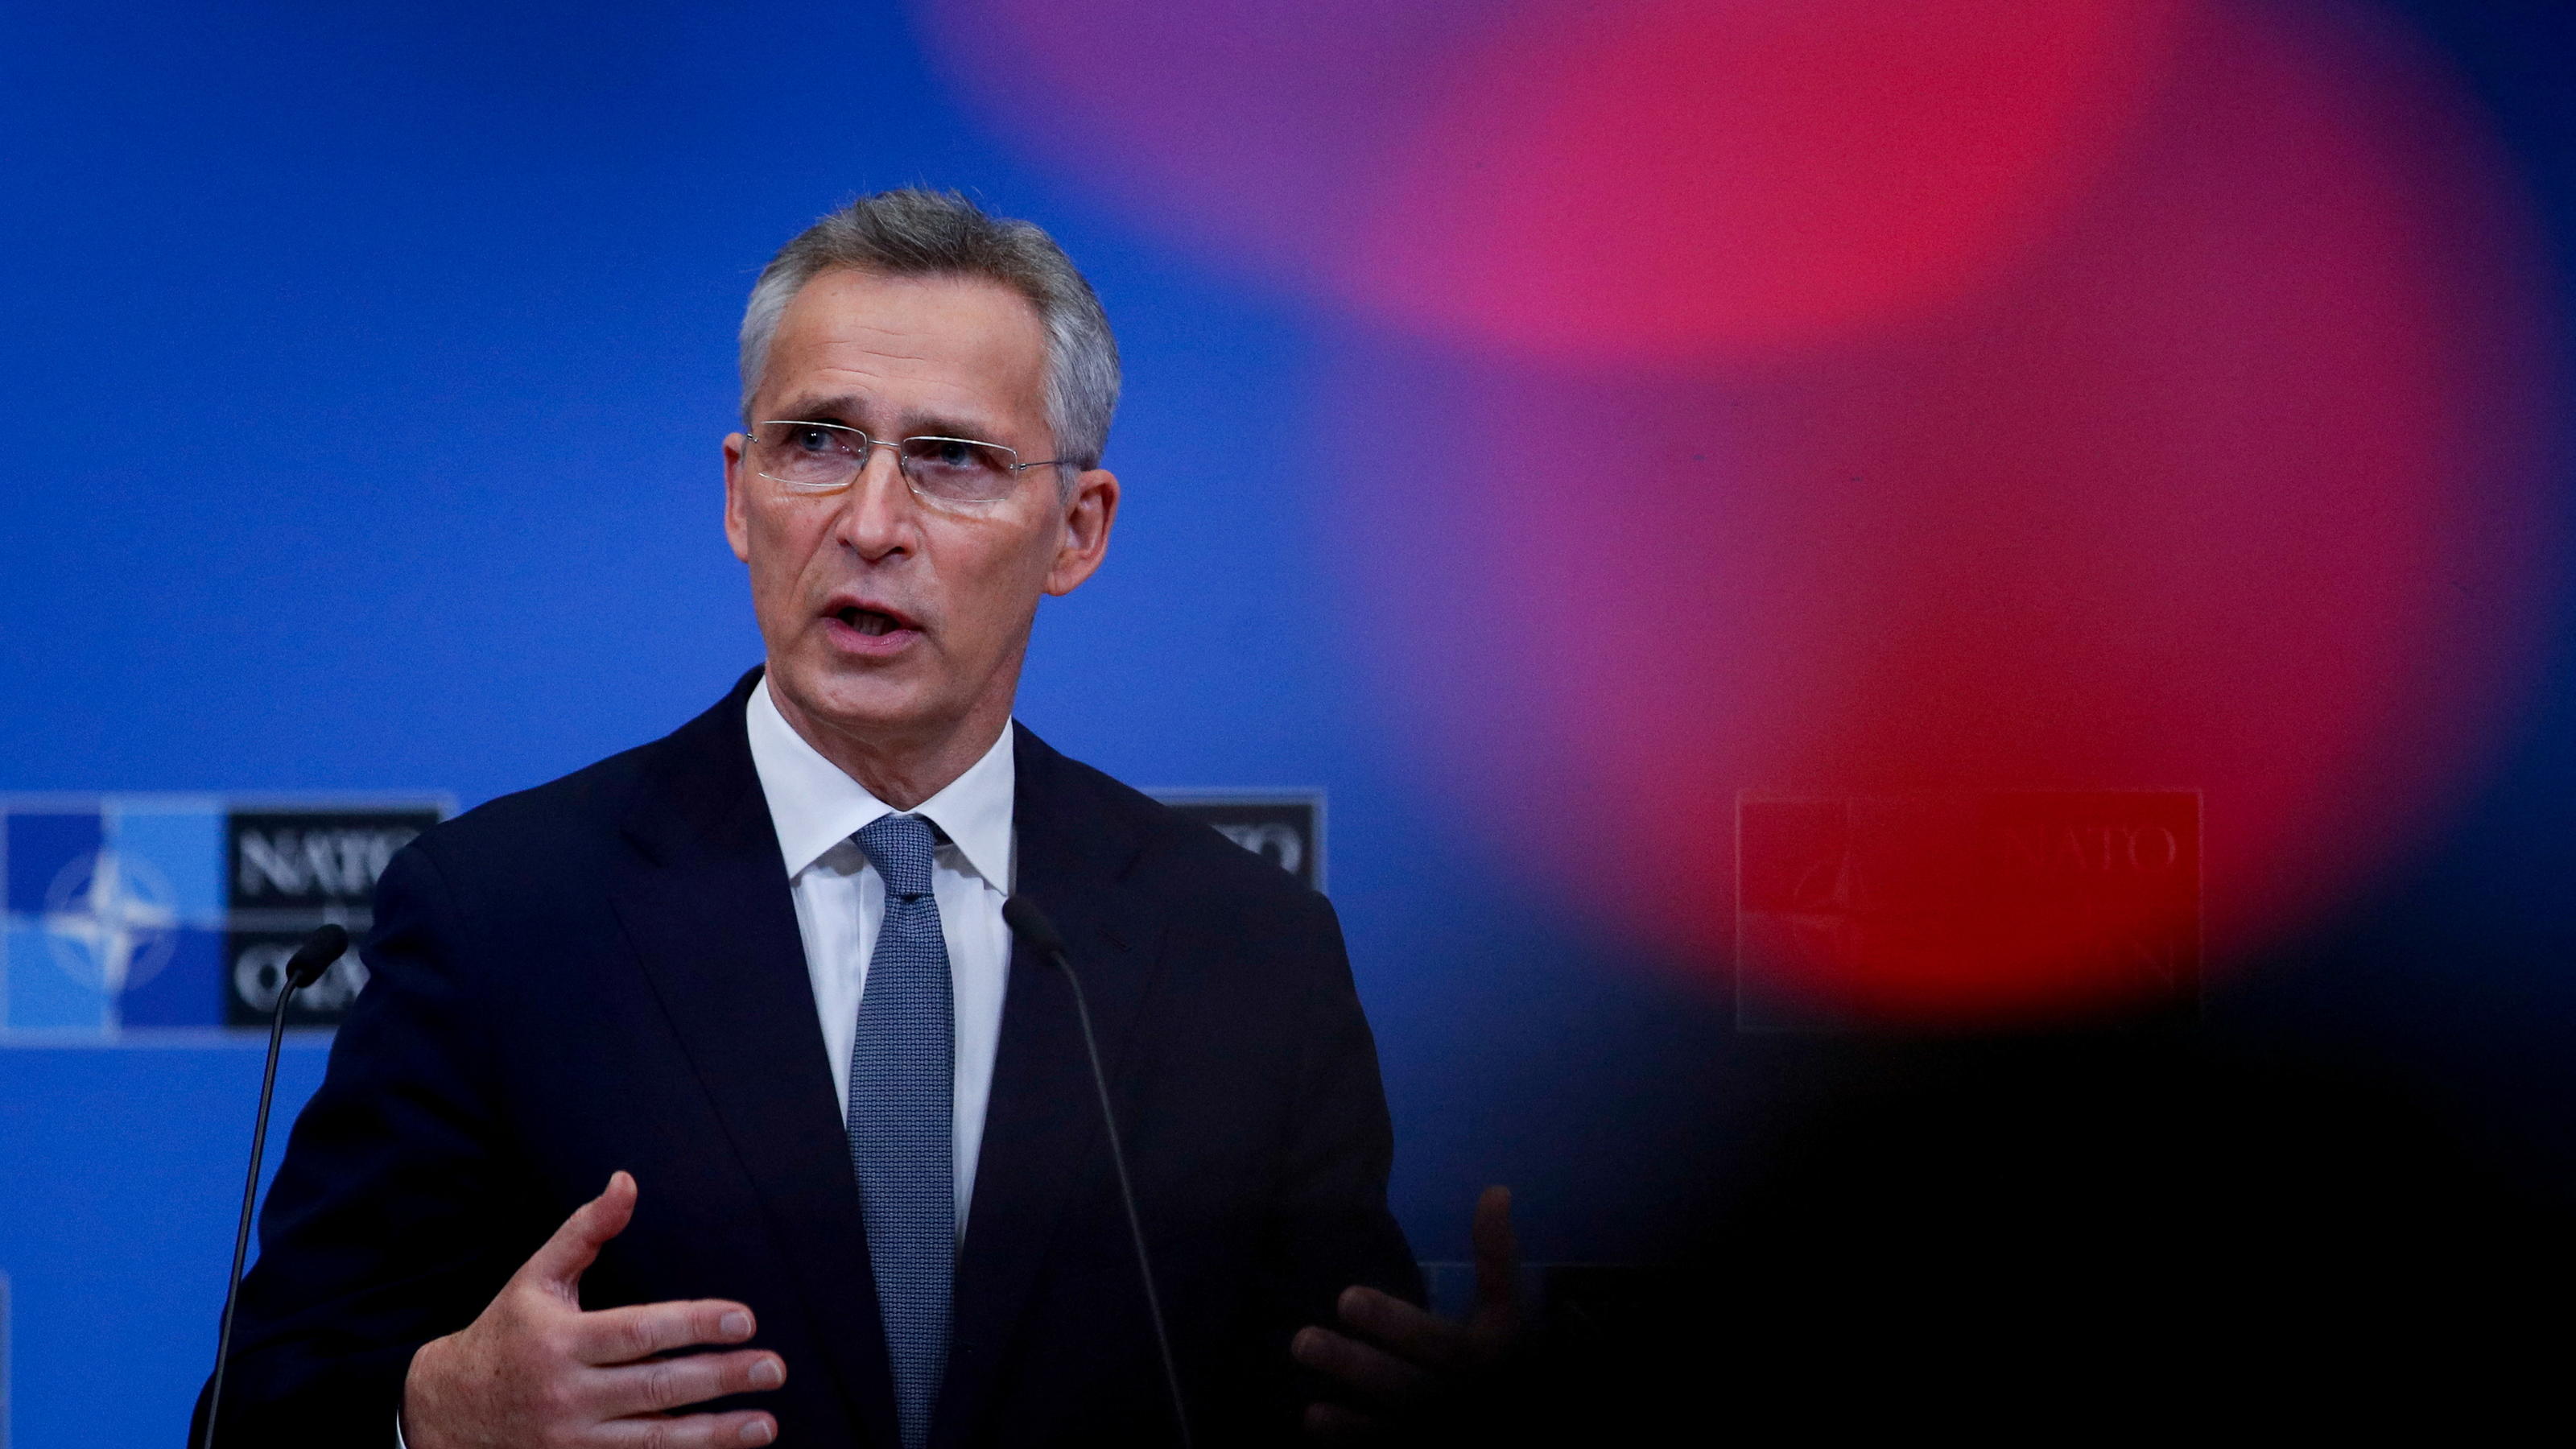 NATO Secretary-General Jens Stoltenberg gestures as he gives a news conference ahead of a meeting of NATO defence ministers in Brussels, Belgium February 15, 2022. REUTERS/Johanna Geron